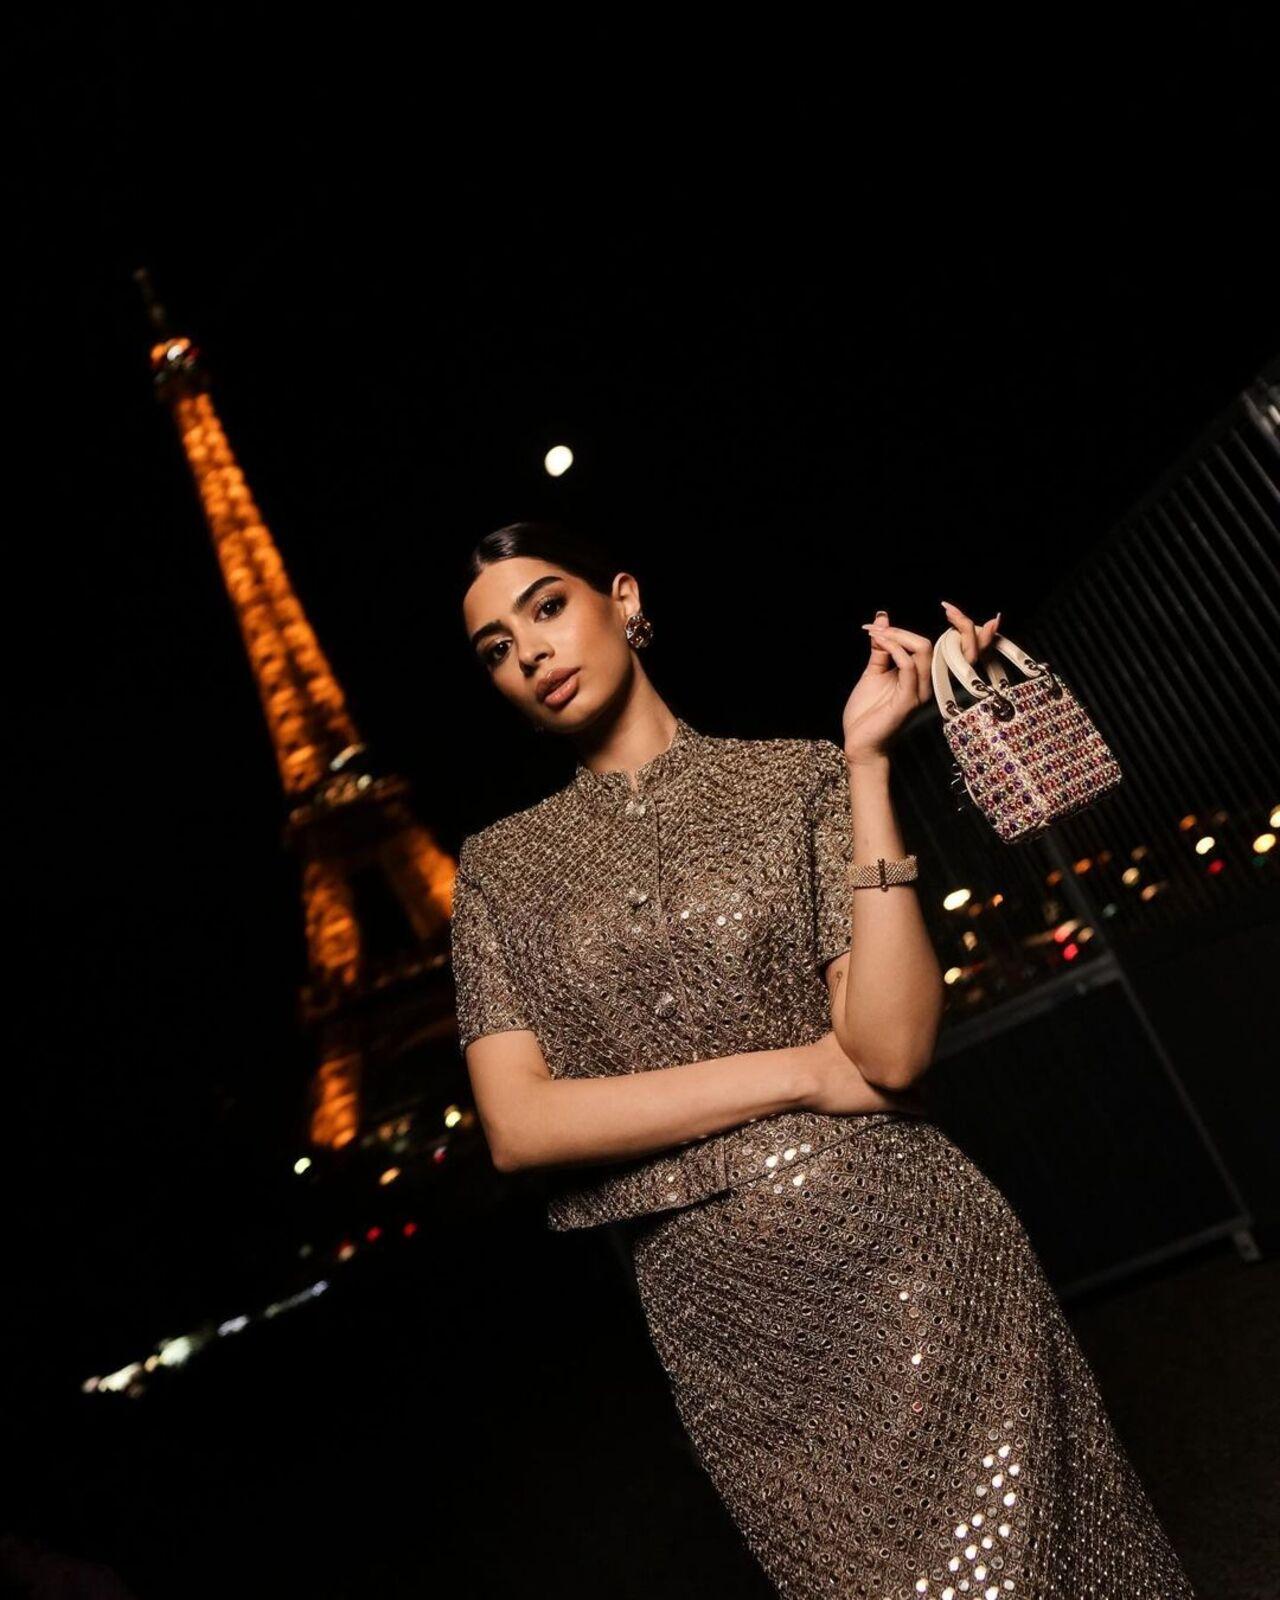 Khushi Kapoor shines in her outfit as she poses with Eiffel Tower in the backdrop